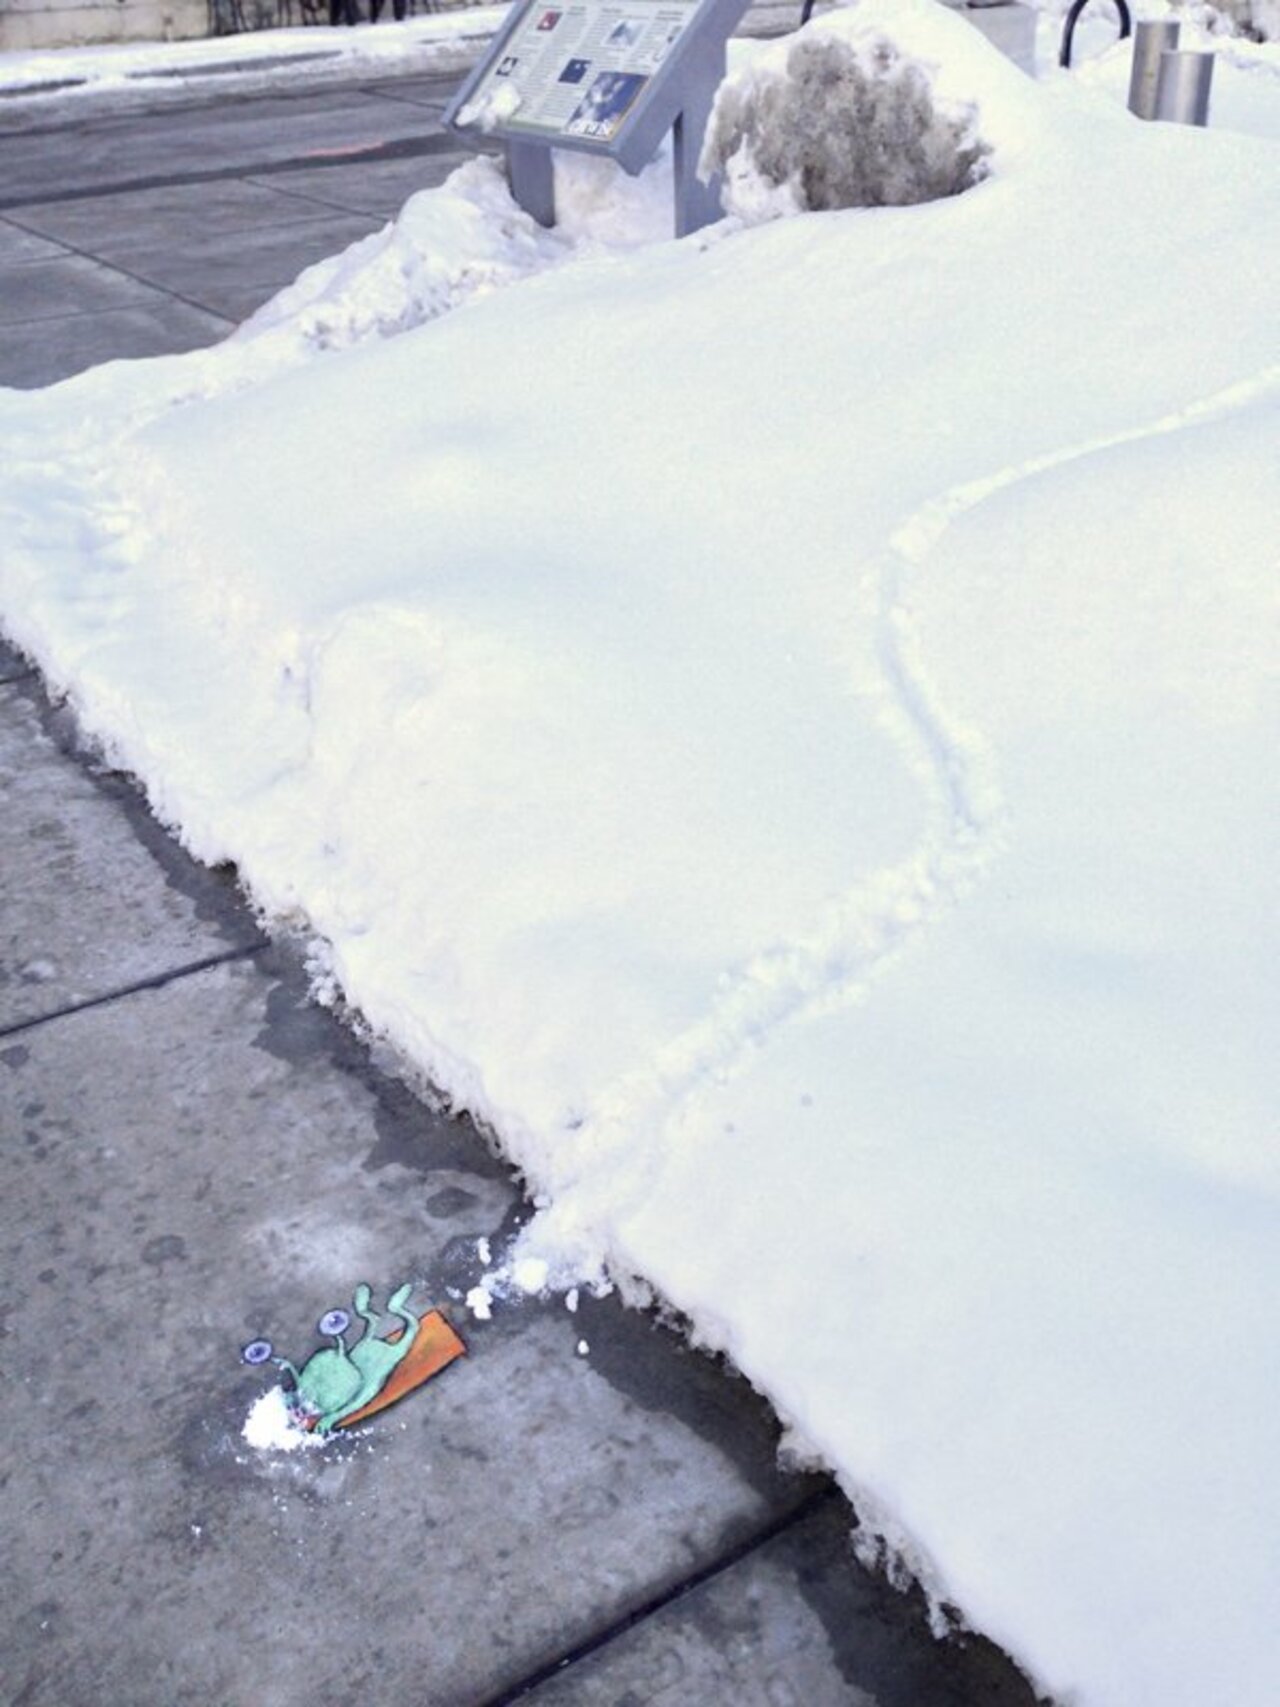 Heavy snow in Michigan means I'll have to take another break from drawing on sidewalks. (Luckily, my friend Sluggo is not so easily discouraged.) Image excerpt from http://bit.ly/2wRDcZ1 #streetart #chalkart #sledding #graffiti #snowsports https://t.co/bkjR2kldyc